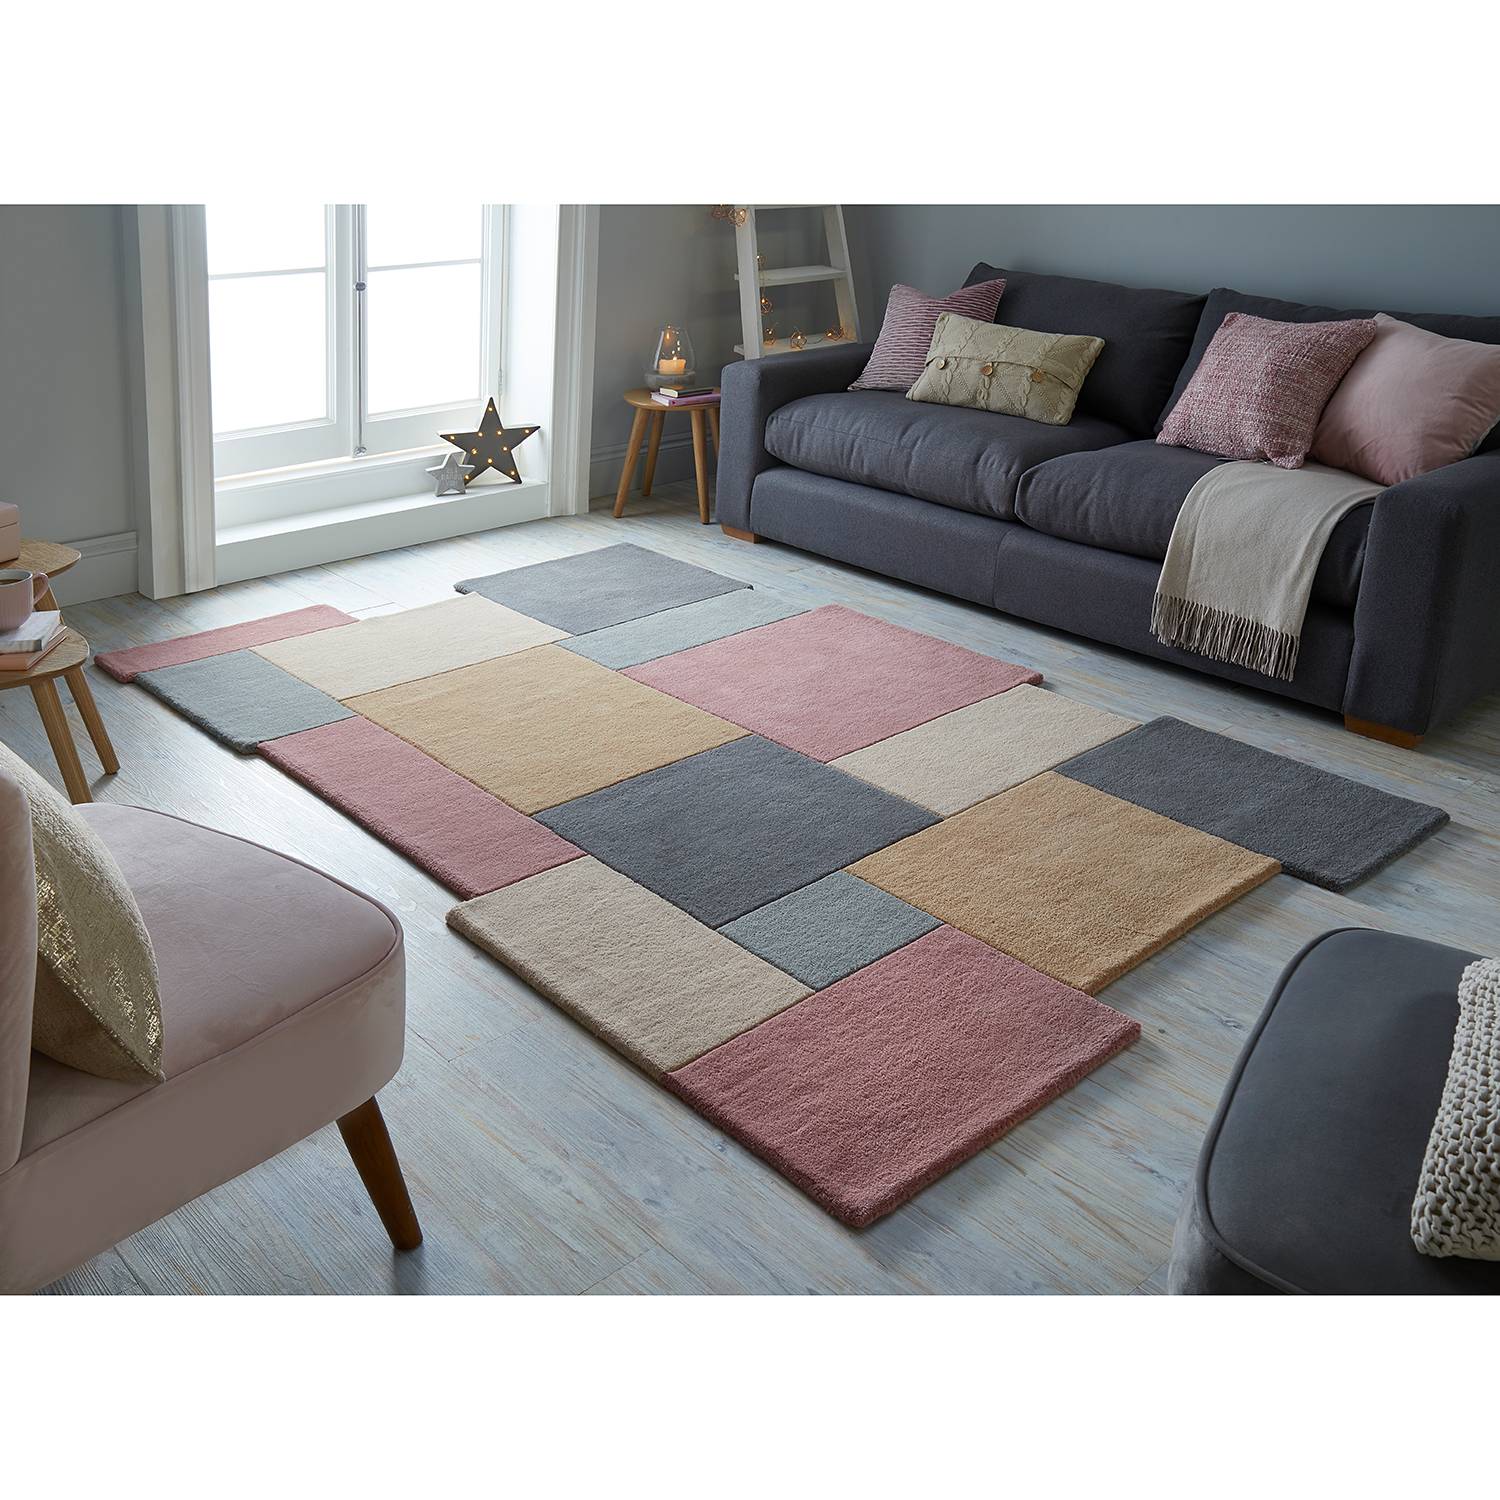 Image of Tapis en laine Collage 000000001000230113